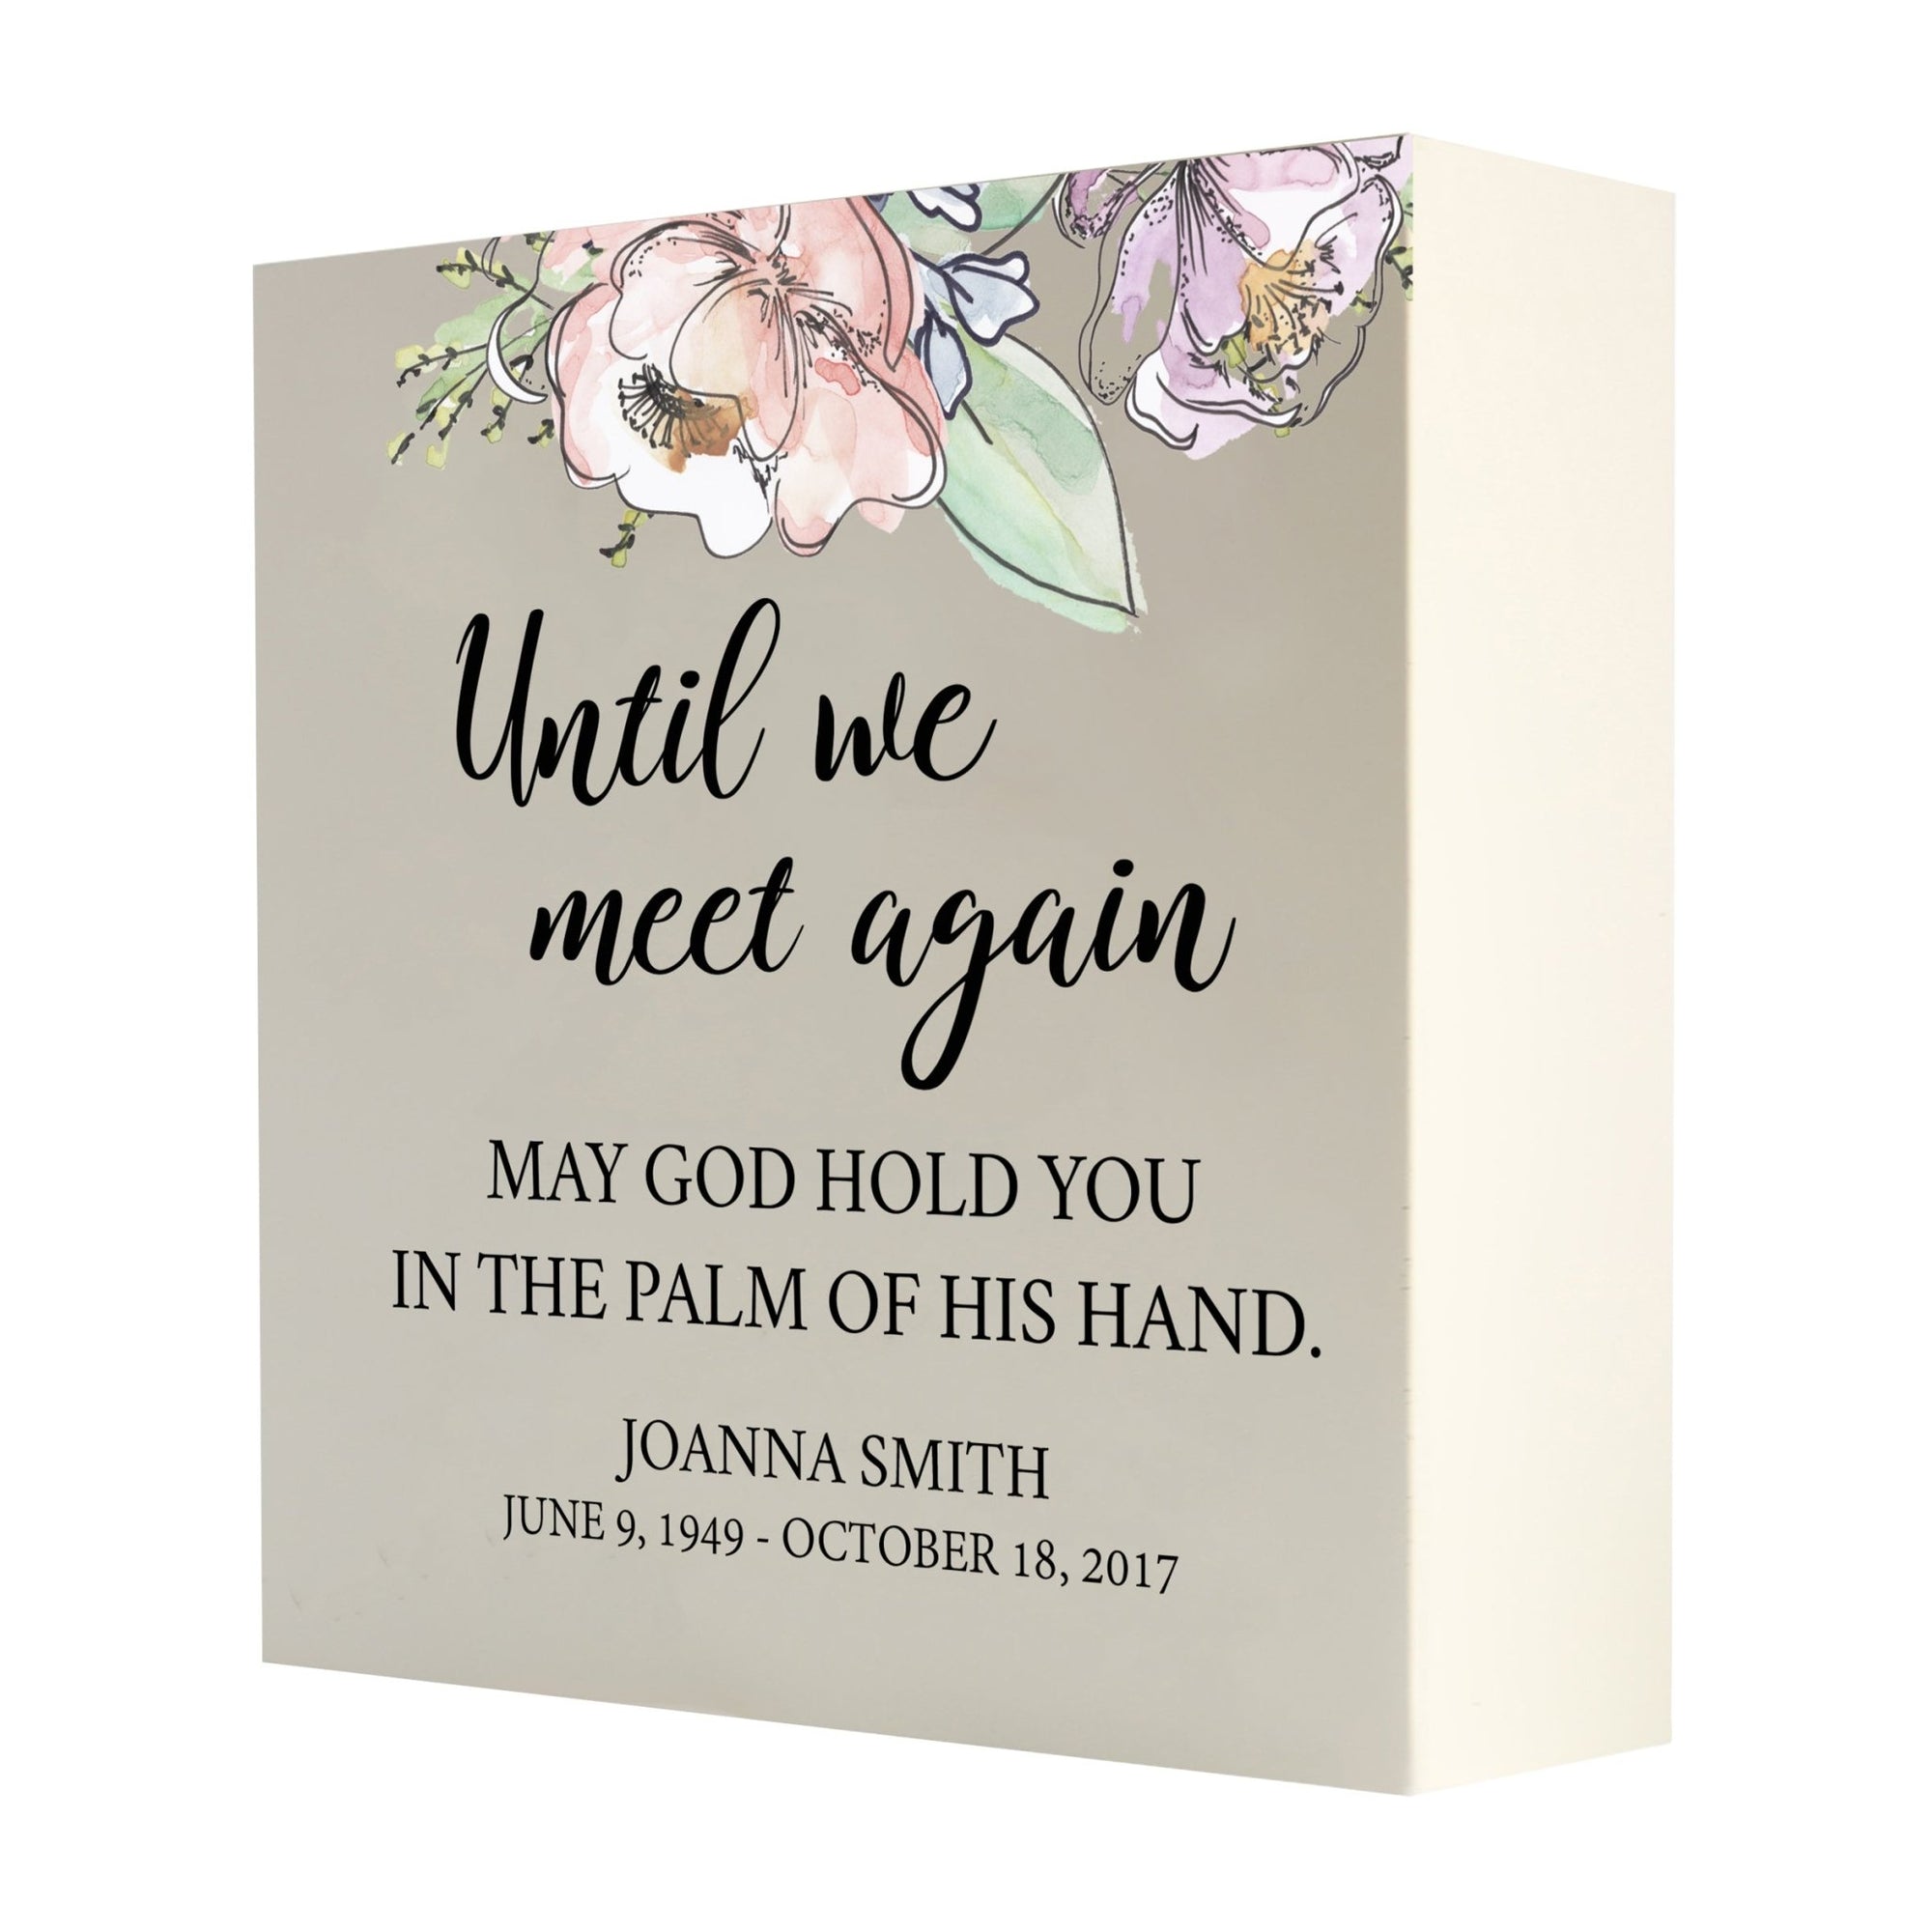 Personalized Modern Inspirational Memorial Wooden Shadow Box and Urn 10x10 holds 189 cu in of Human Ashes - Until We Meet Again (Palm) - LifeSong Milestones